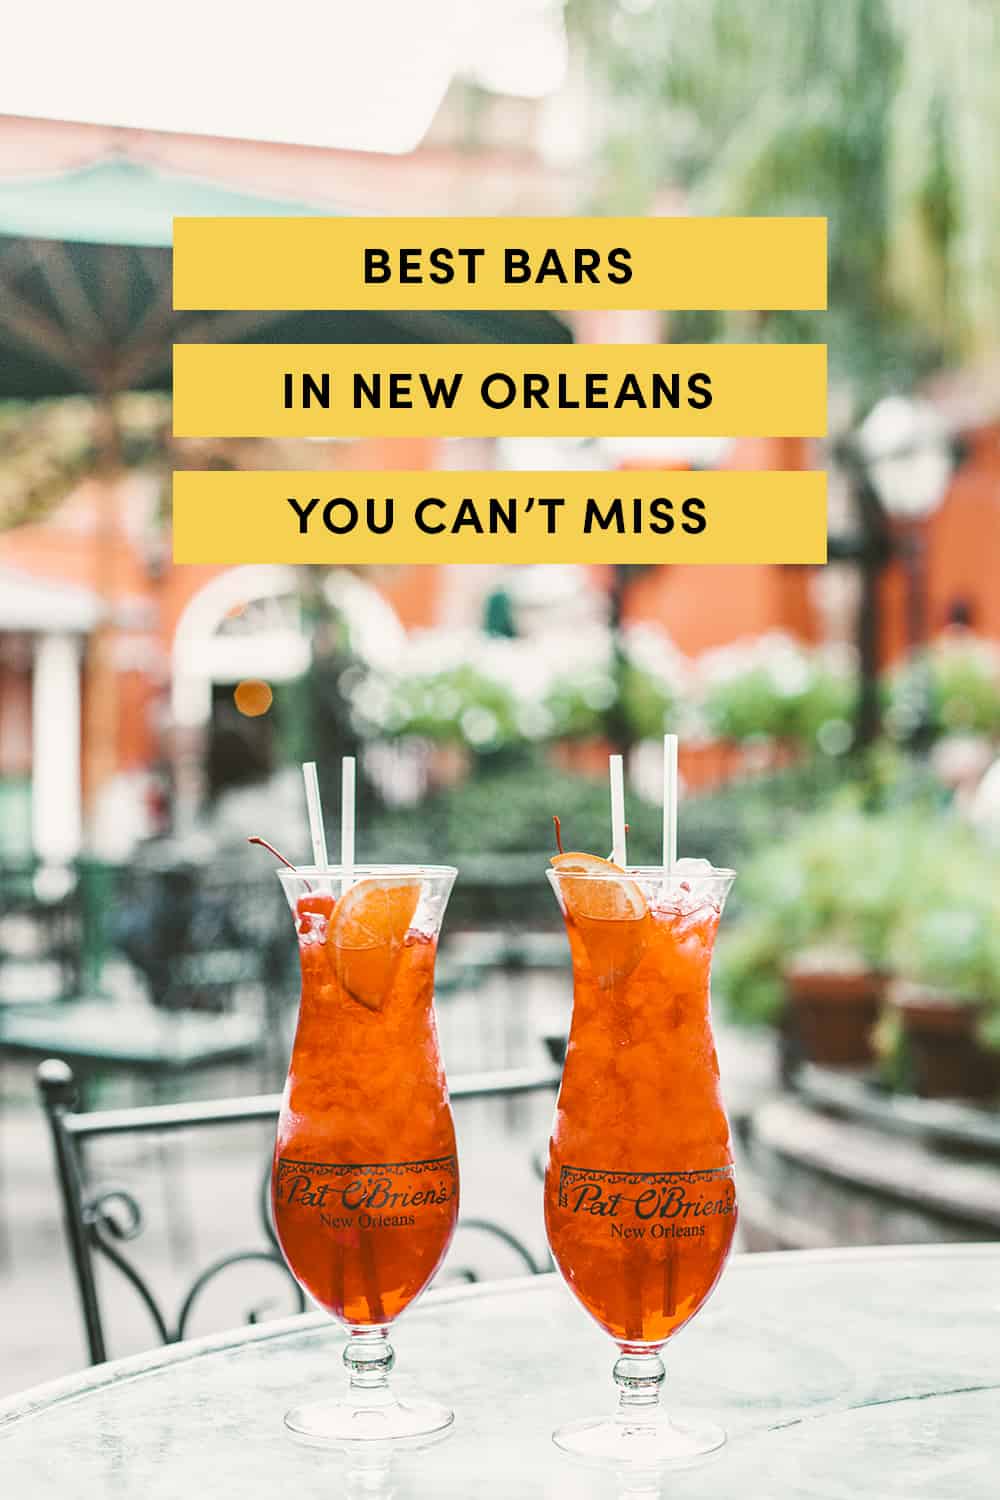 Best Bars in New Orleans You Can't Miss